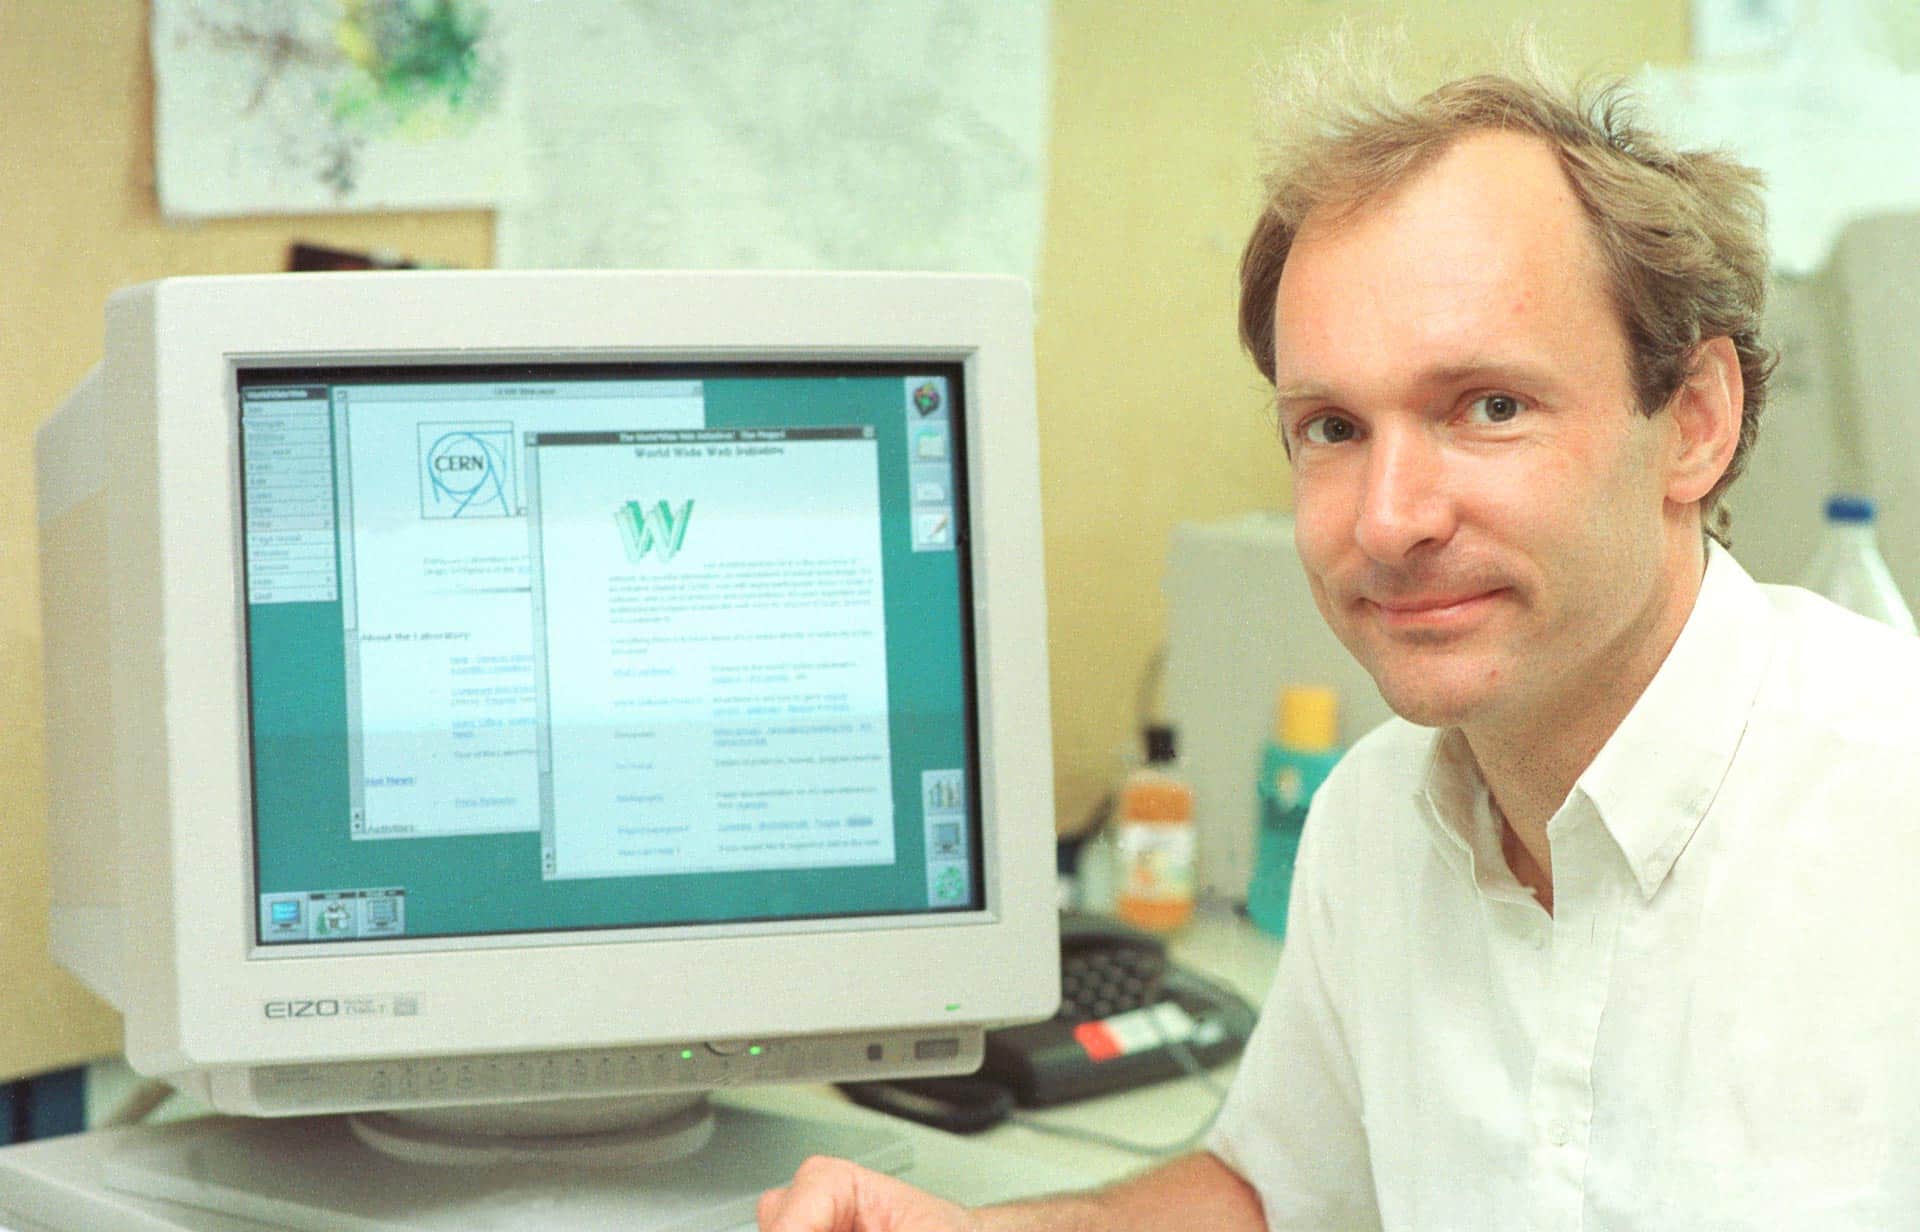 Former physicist, Tim Berners-Lee invented the World Wide Web as an essential tool for high energy physics at CERN from 1989 to 1994. Together with a small team he conceived HTML, http, URLs, and put up the first server and the first 'what you see is what you get' browser and html editor. Tim is now Director of the Web Consortium W3C, the International Web standards body based at INRIA, MIT and Keio University.